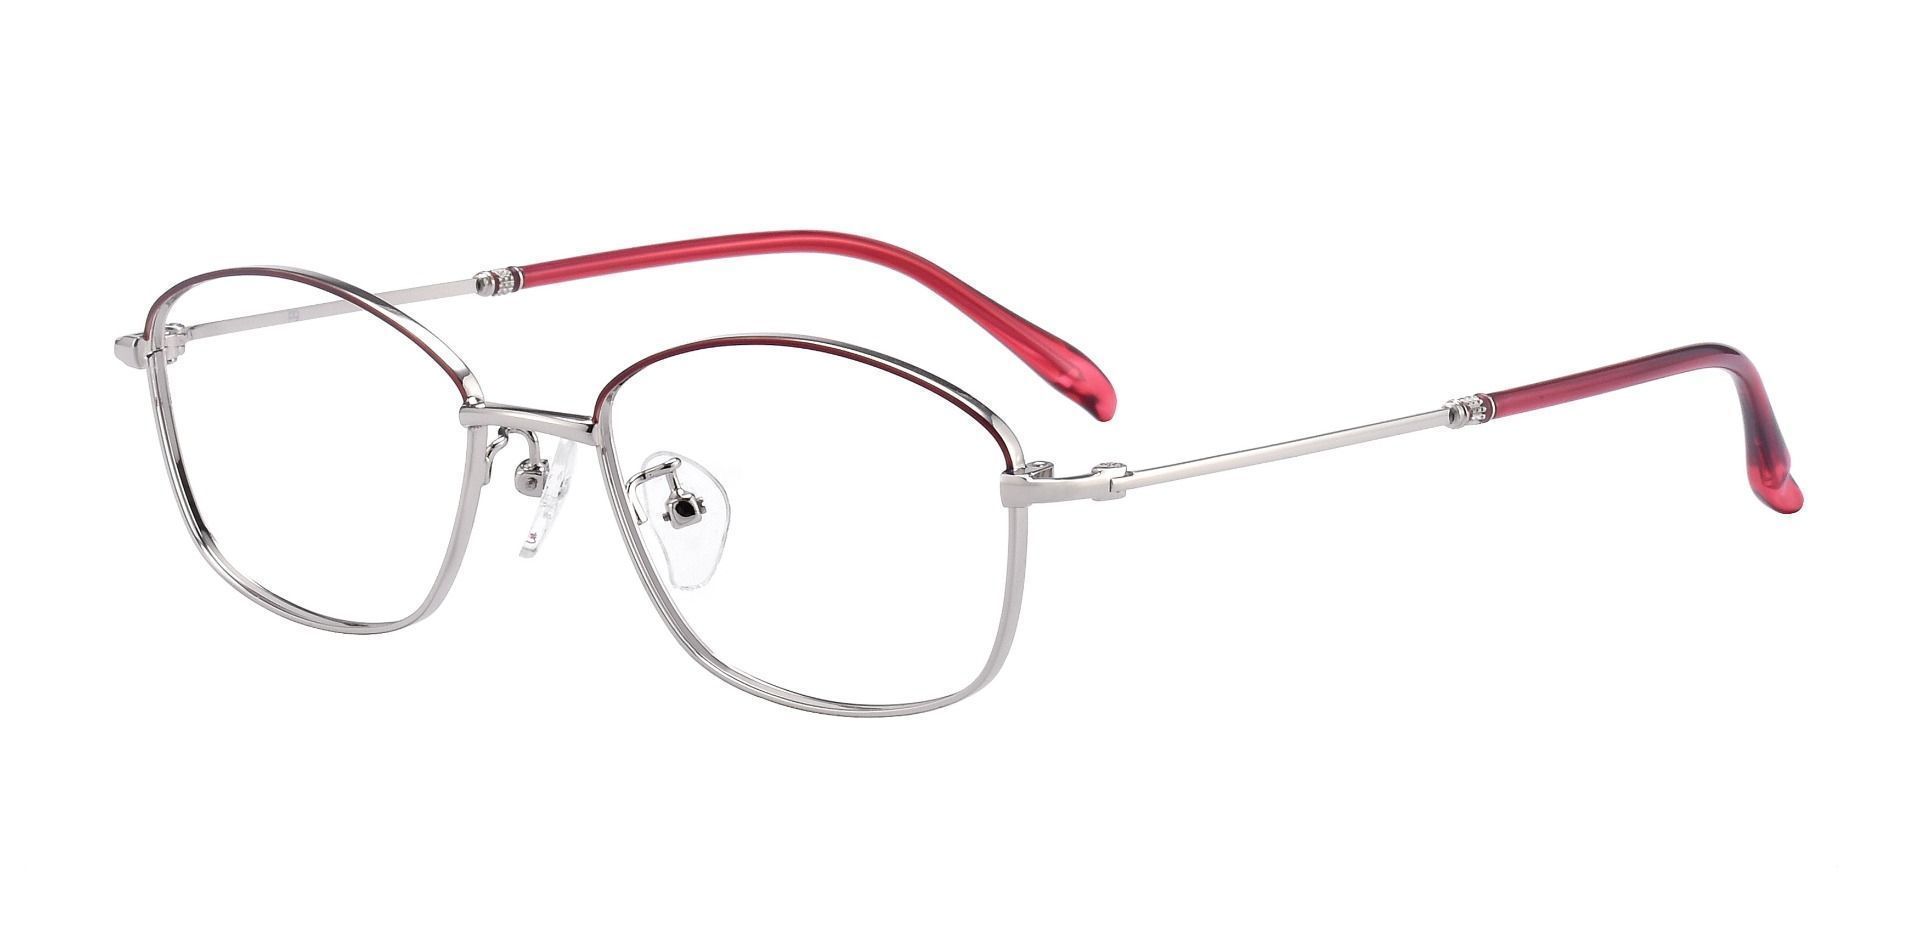 Cortland Oval Reading Glasses - Red